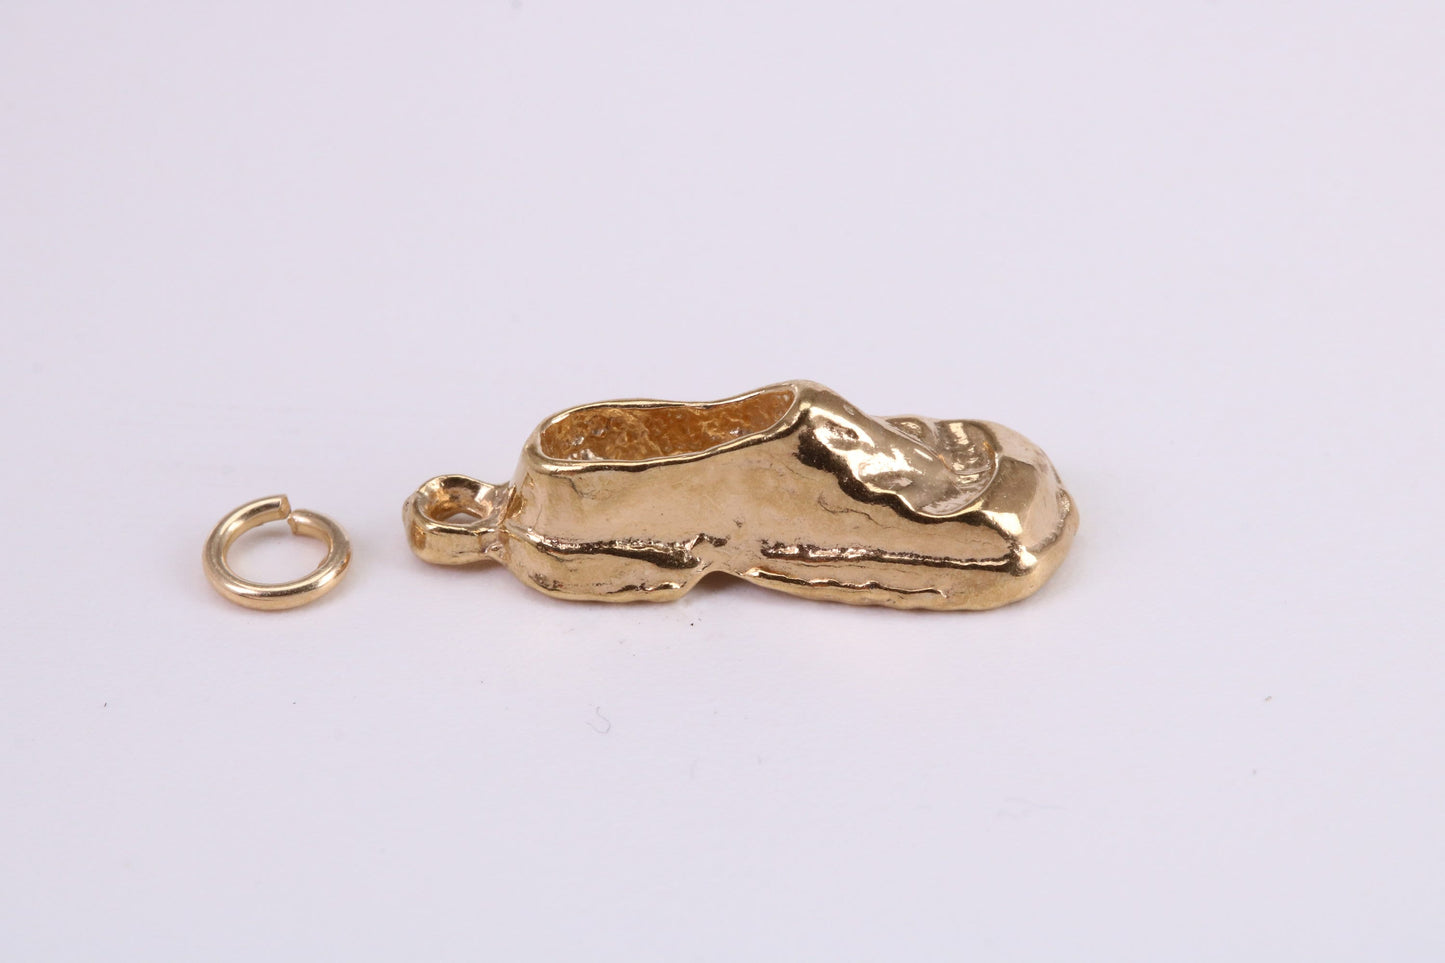 Old Shoe Charm, Traditional Charm, Made from Solid Yellow Gold, British Hallmarked, Complete with Attachment Link